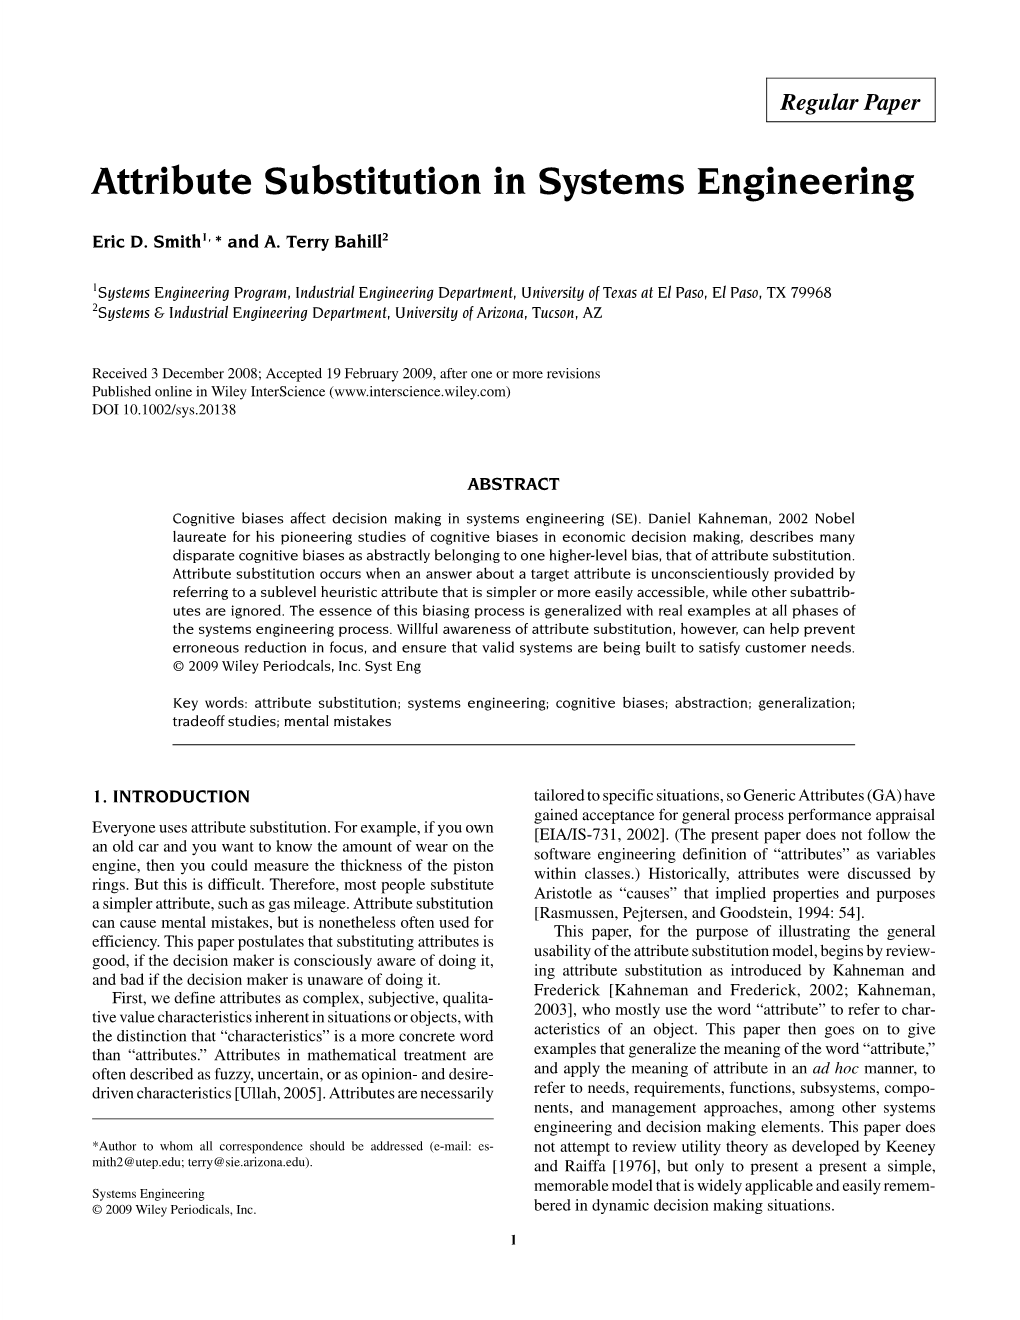 Attribute Substitution in Systems Engineering